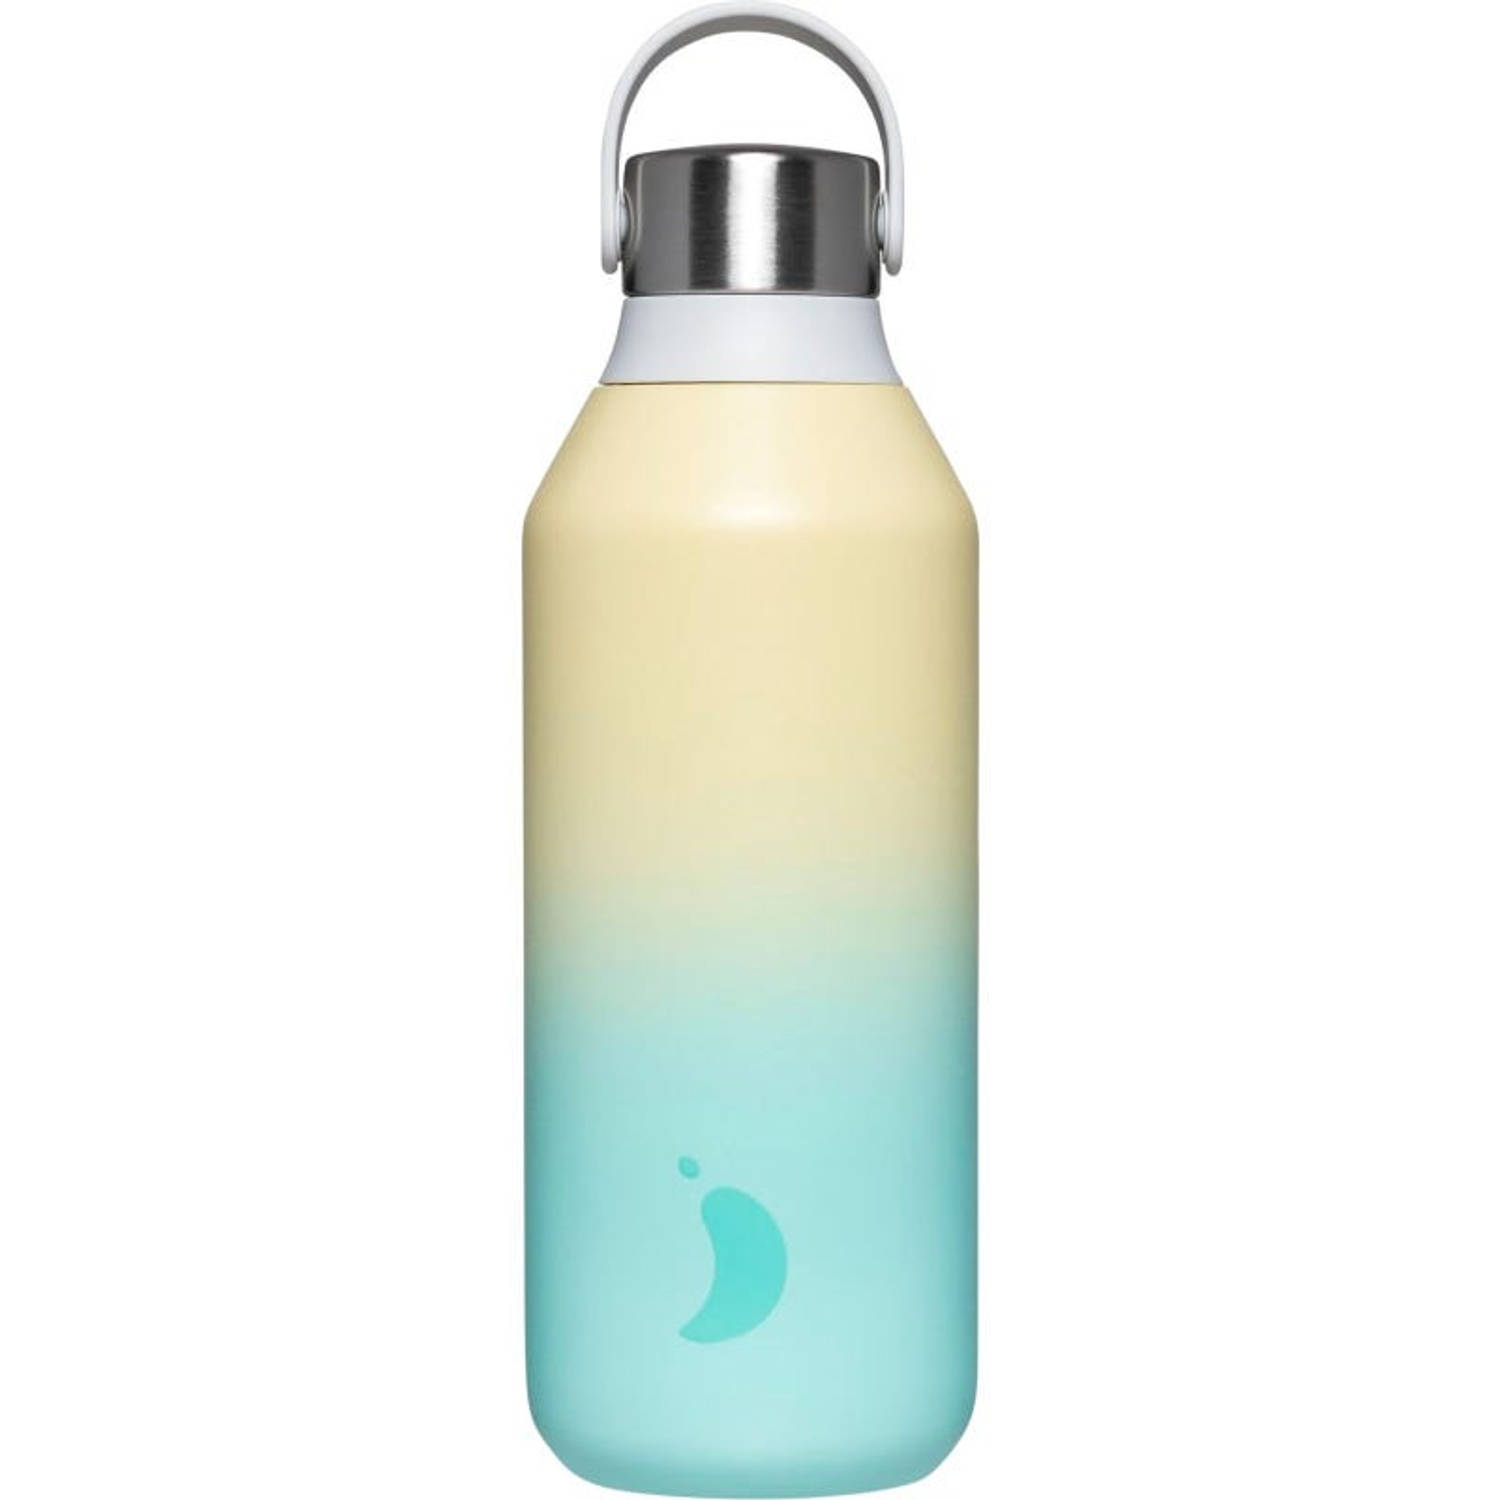 Chillys Series 2 - Drinkfles - Thermosfles - 500ml - Dusk